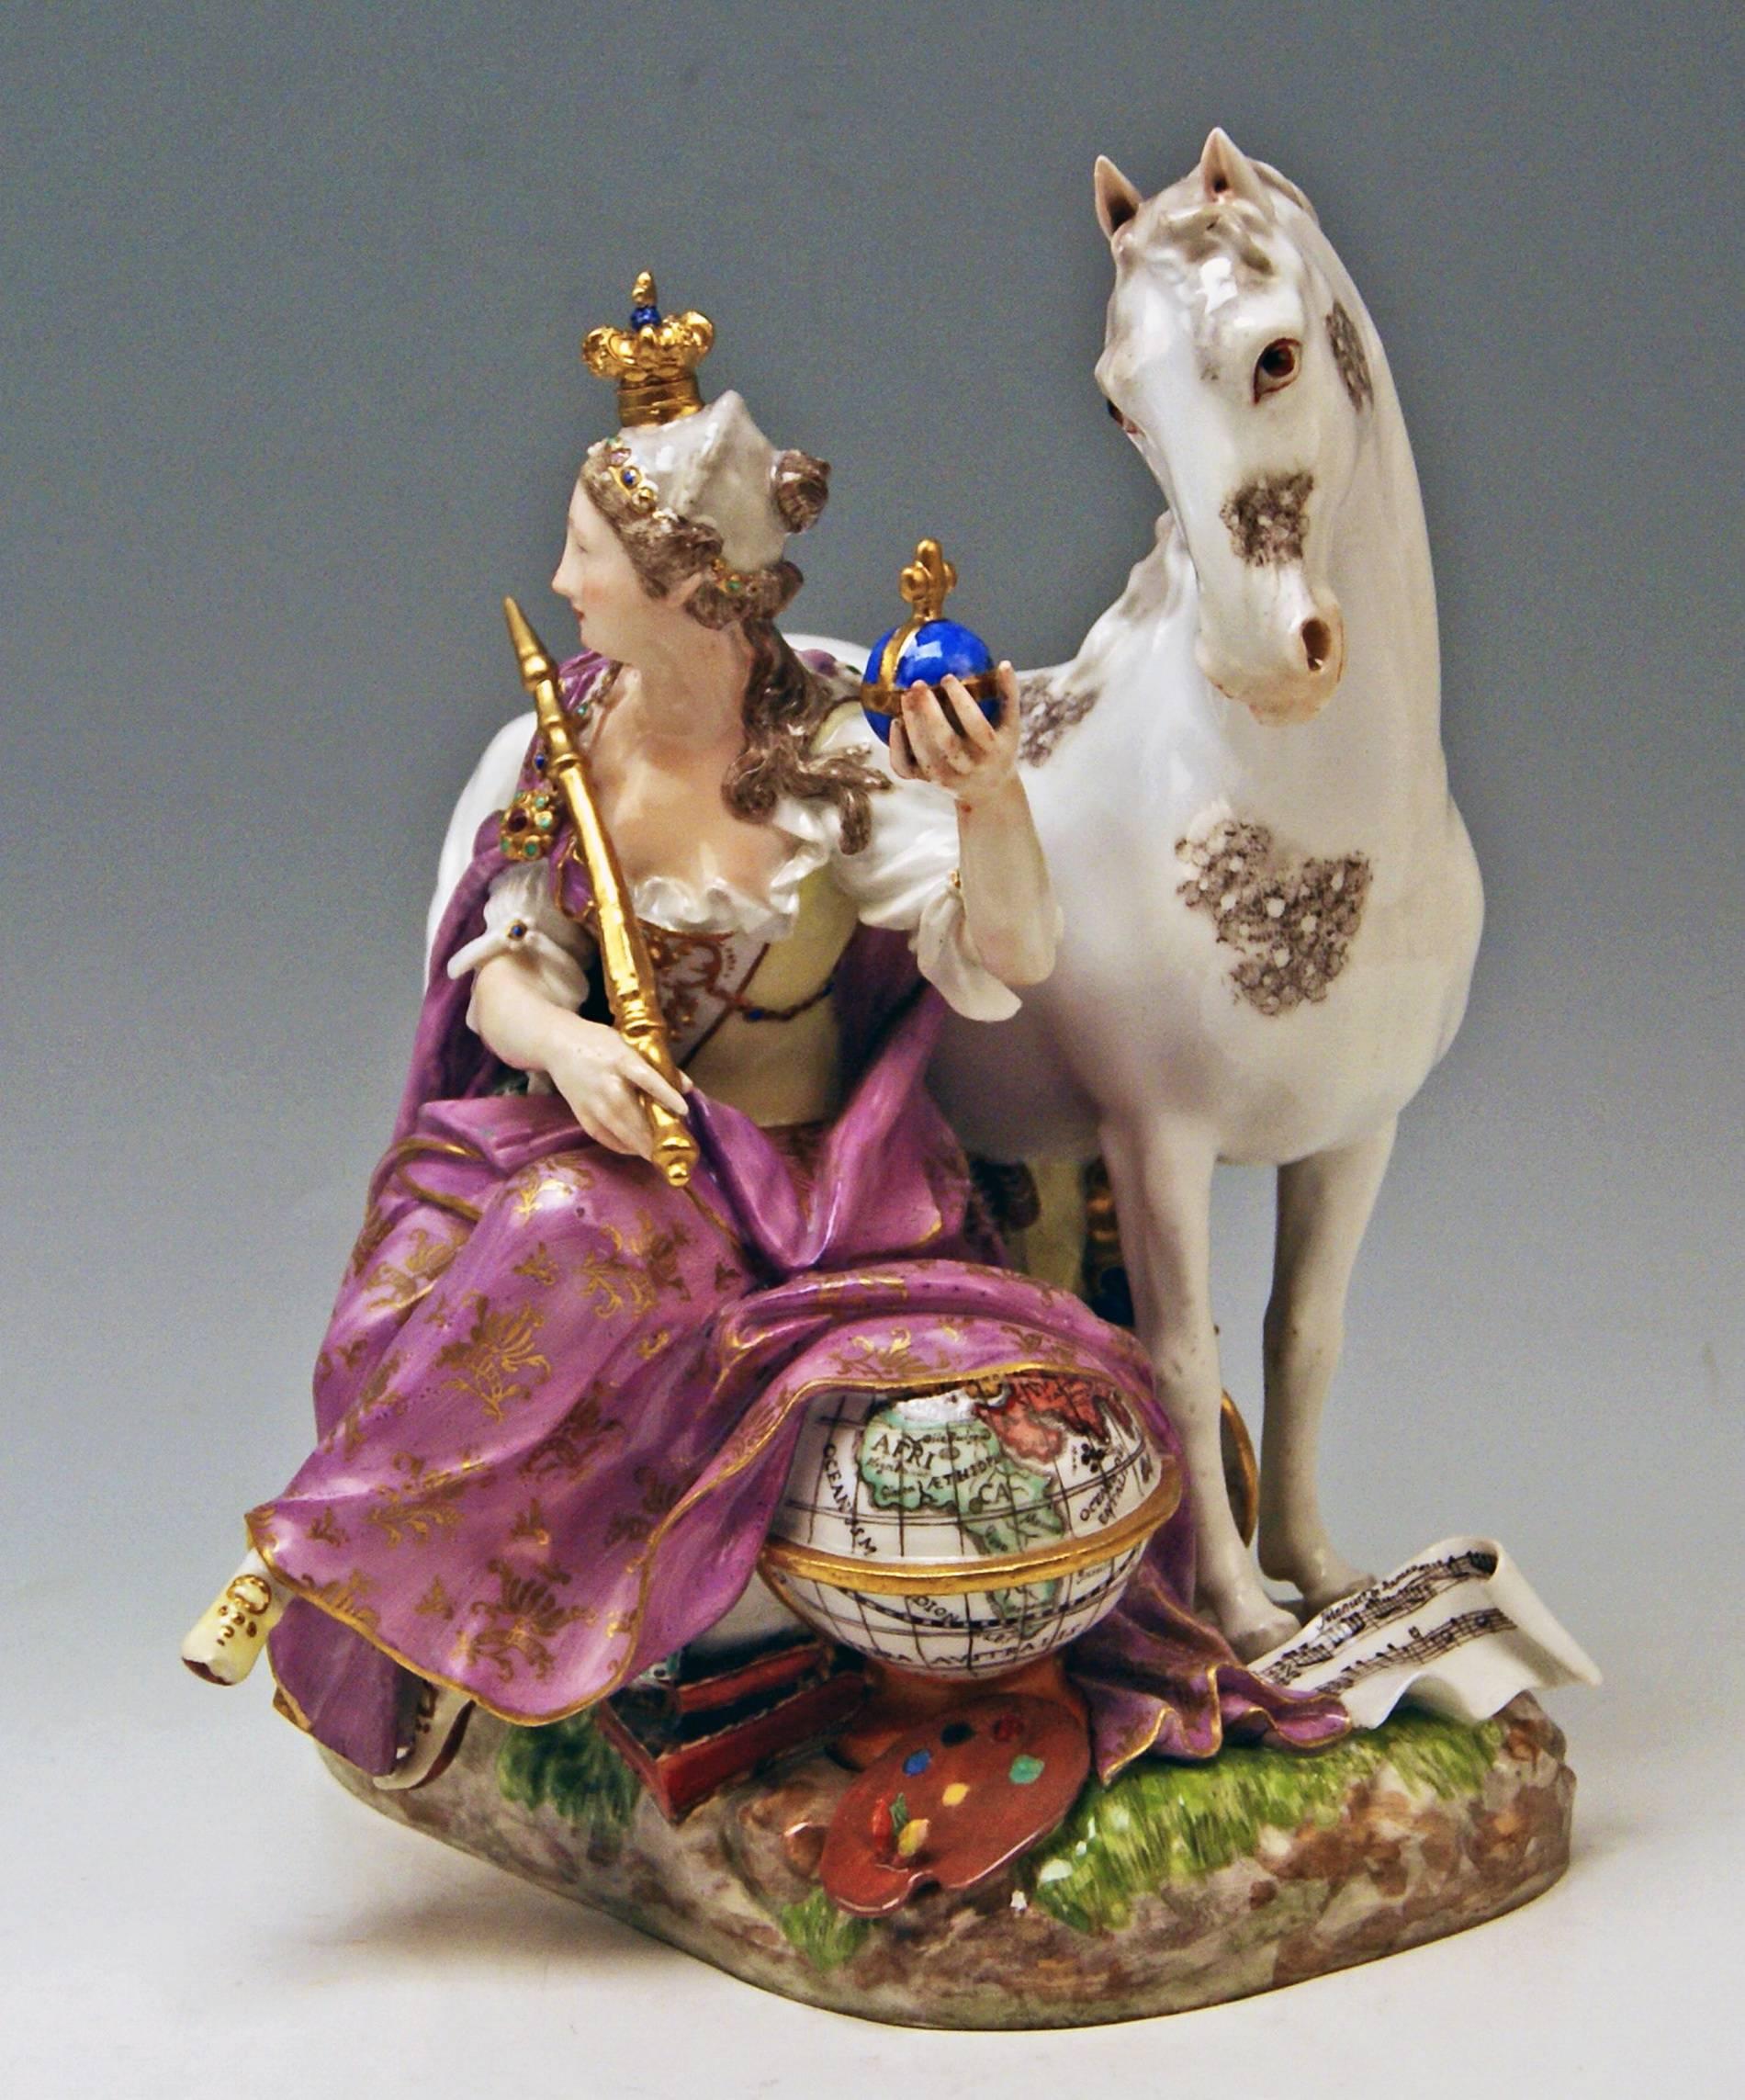 Meissen most remarkable figurine group: 
Allegory of Europe/ model deriving from a series once made for Russian Czarina Elizabeth Petrowna (1709-1762)

Measures/dimensions:
Height: 26.0 cm (= 10.23 inches) 
Width: 28.0 cm (= 11.02 inches) 
Depth: